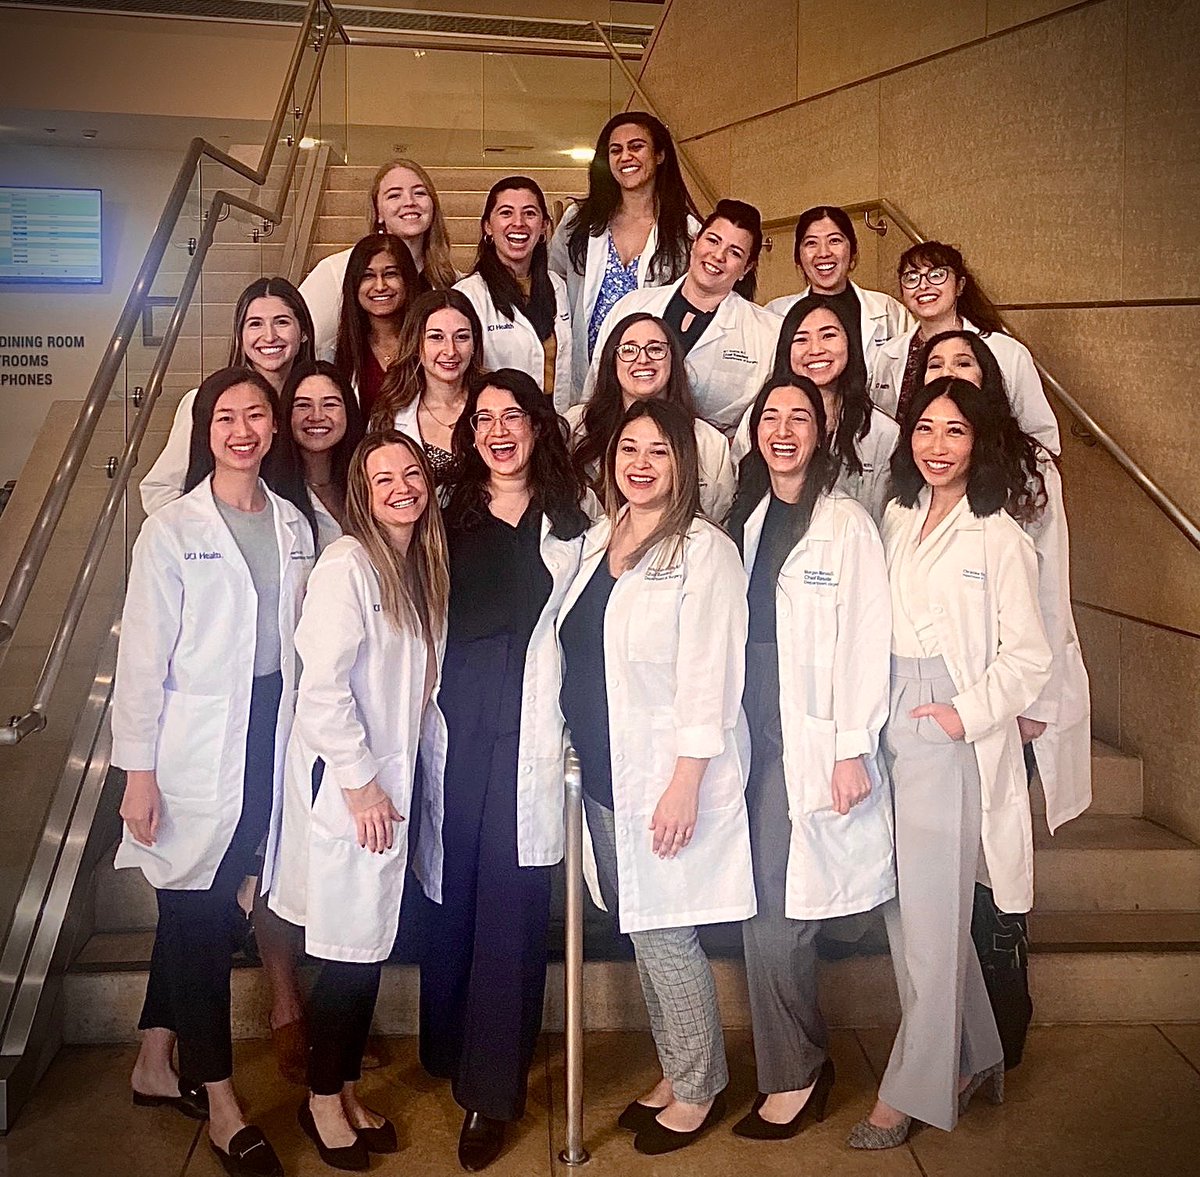 Grateful and proud to work, train, and grow with this incredible group of surgeons, women, sisters, friends, wives, mothers, and all-around exceptional human beings, today and every day. 💪🏻👯‍♀️👩🏻‍⚕️ @UCIrvineSurgery #InternationalWomensDay #WomenInScience